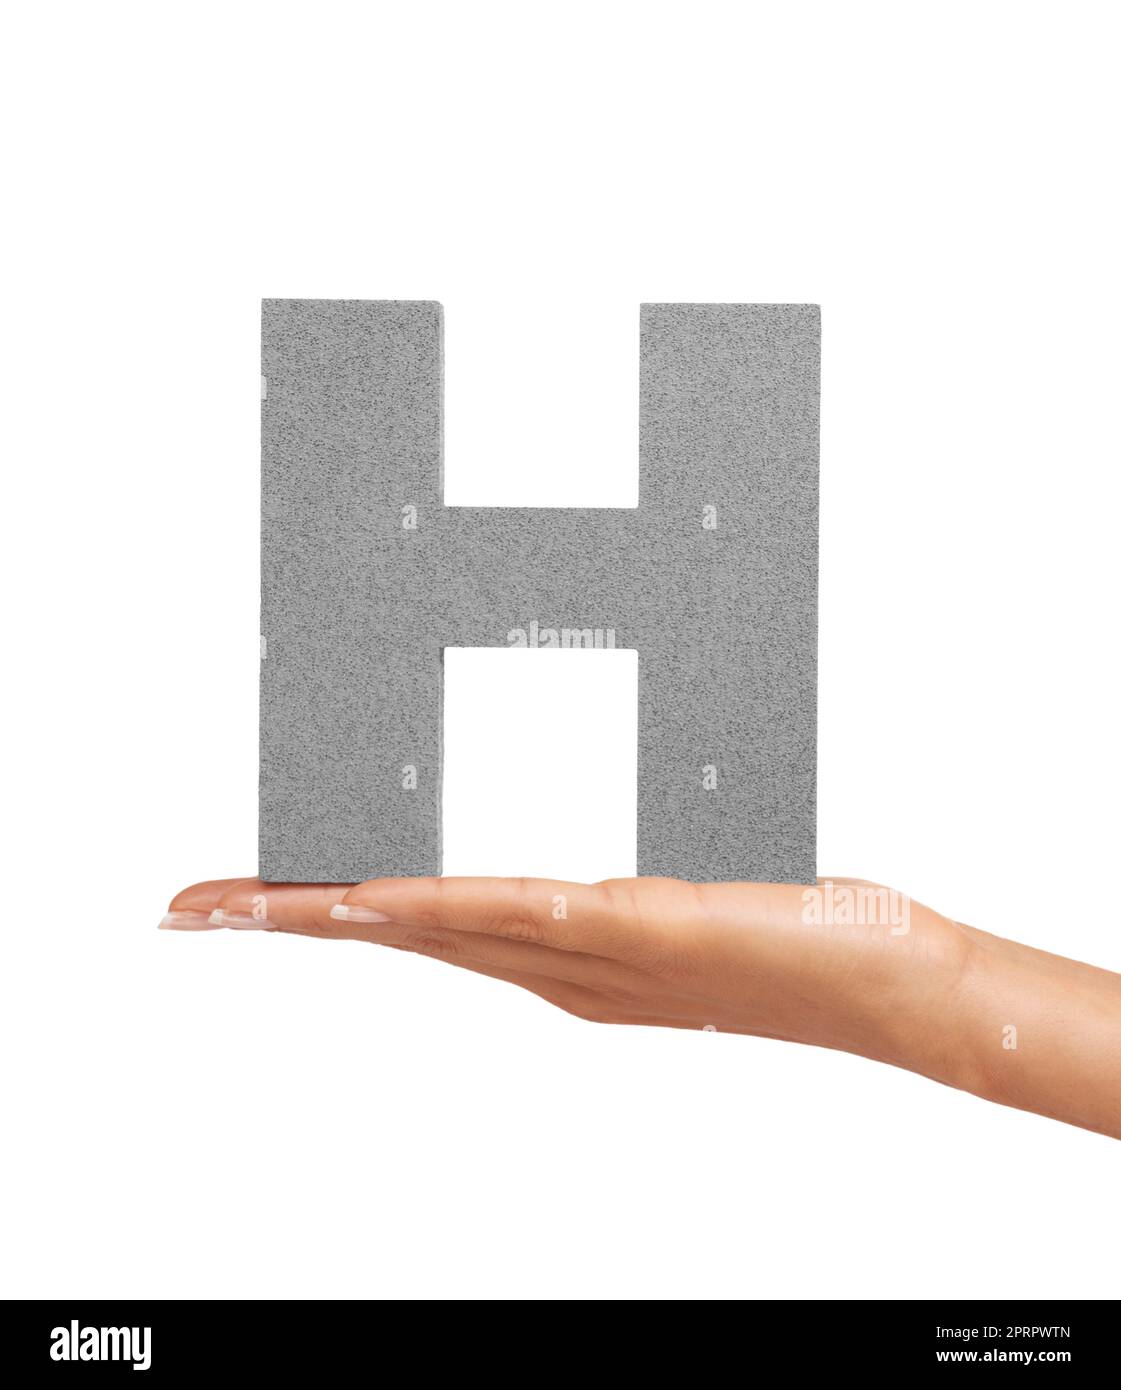 Letters and numbers - Letter h block capitals